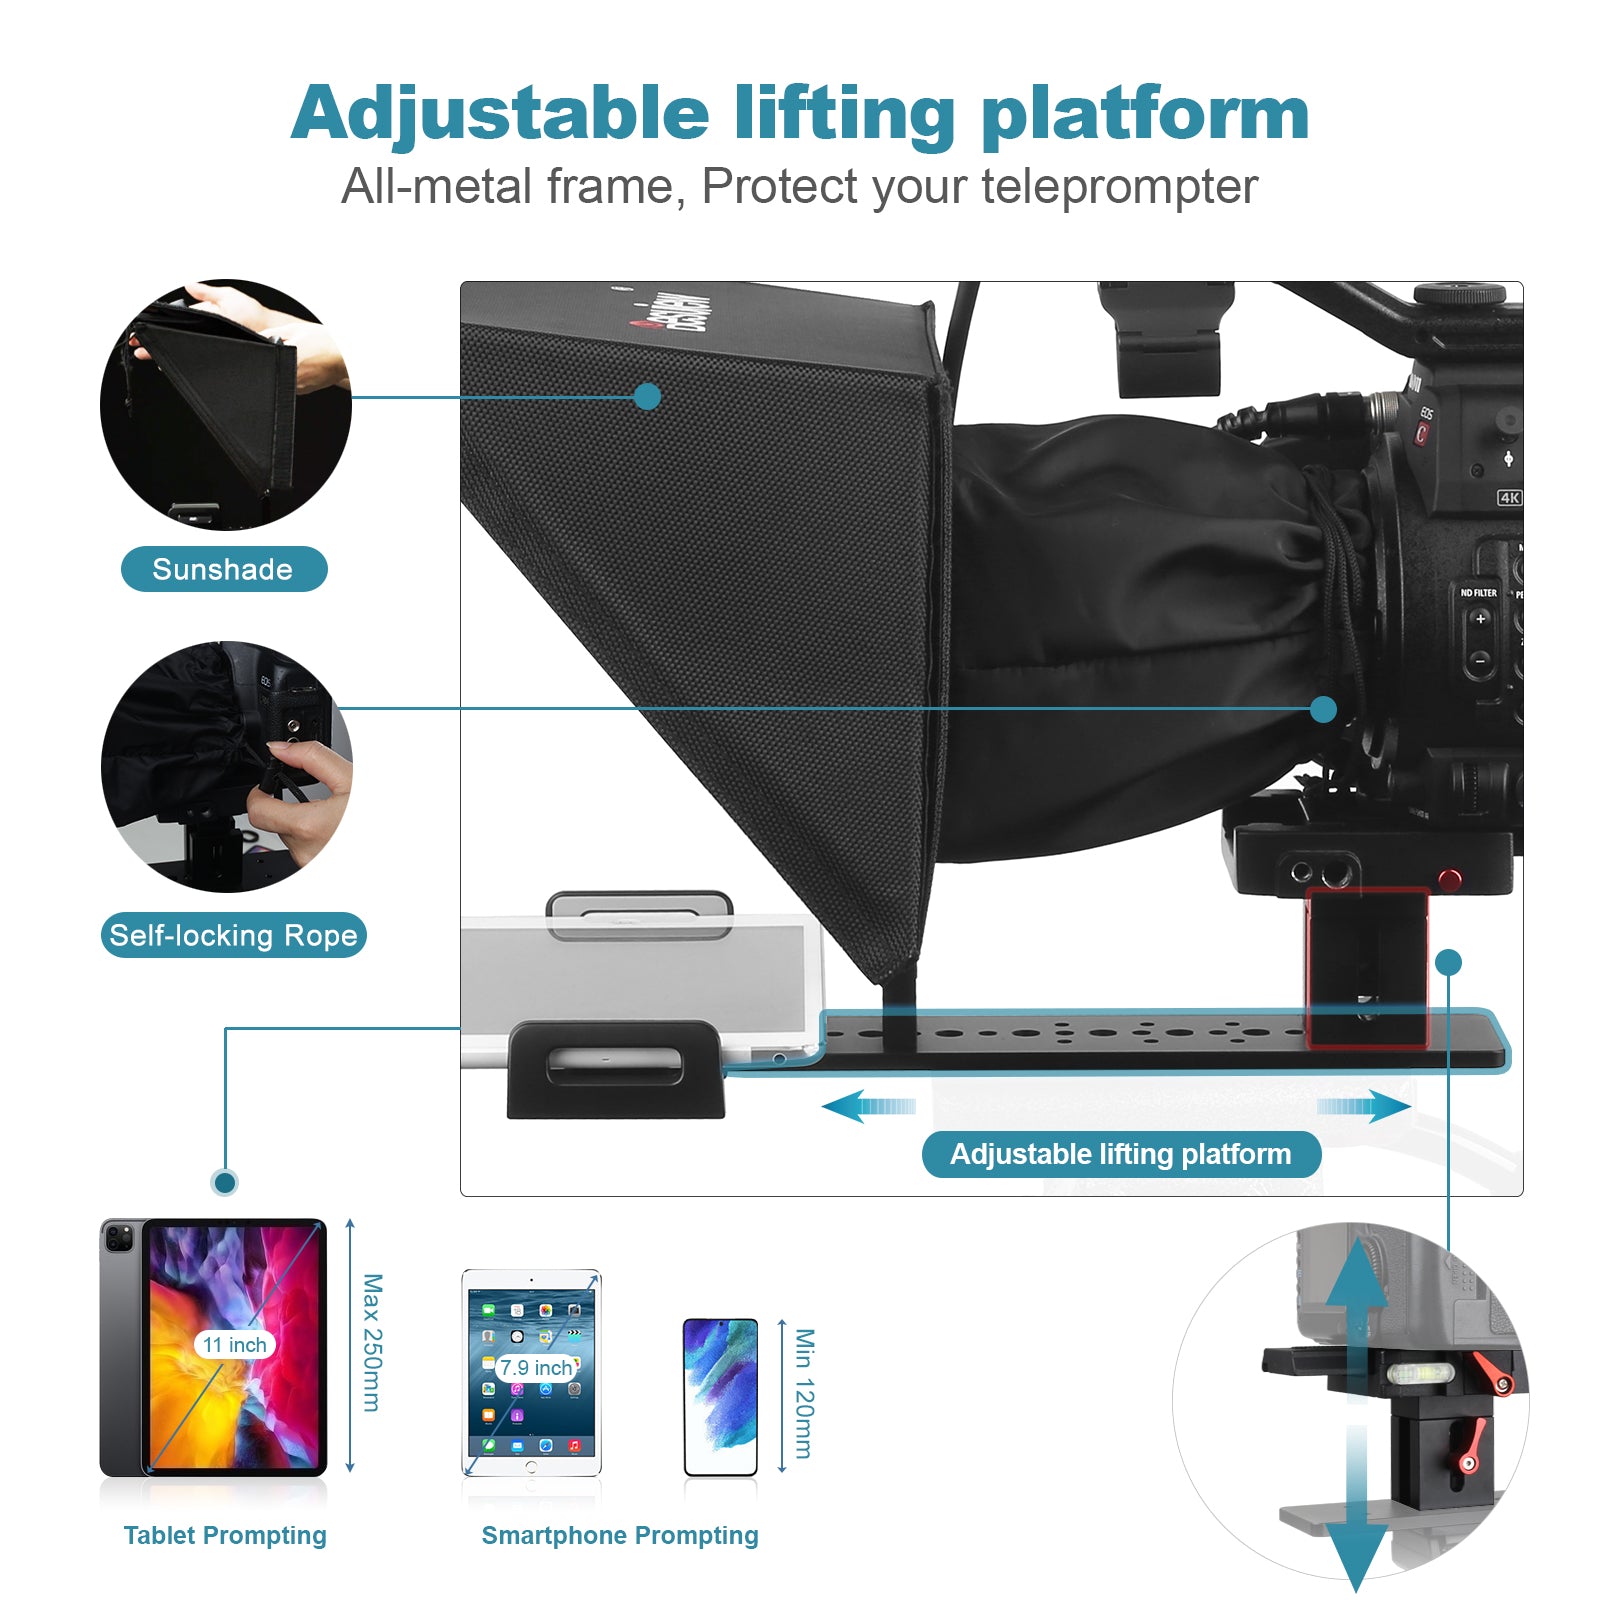 Desview T12 Teleprompter, 12.5 inch High Display Glass, Liftable Teleprompter with Remote Control, Metal Body, Compatible with DSLR/Camcorders/ipad, Easy Assembly with Carry Case for Video Making